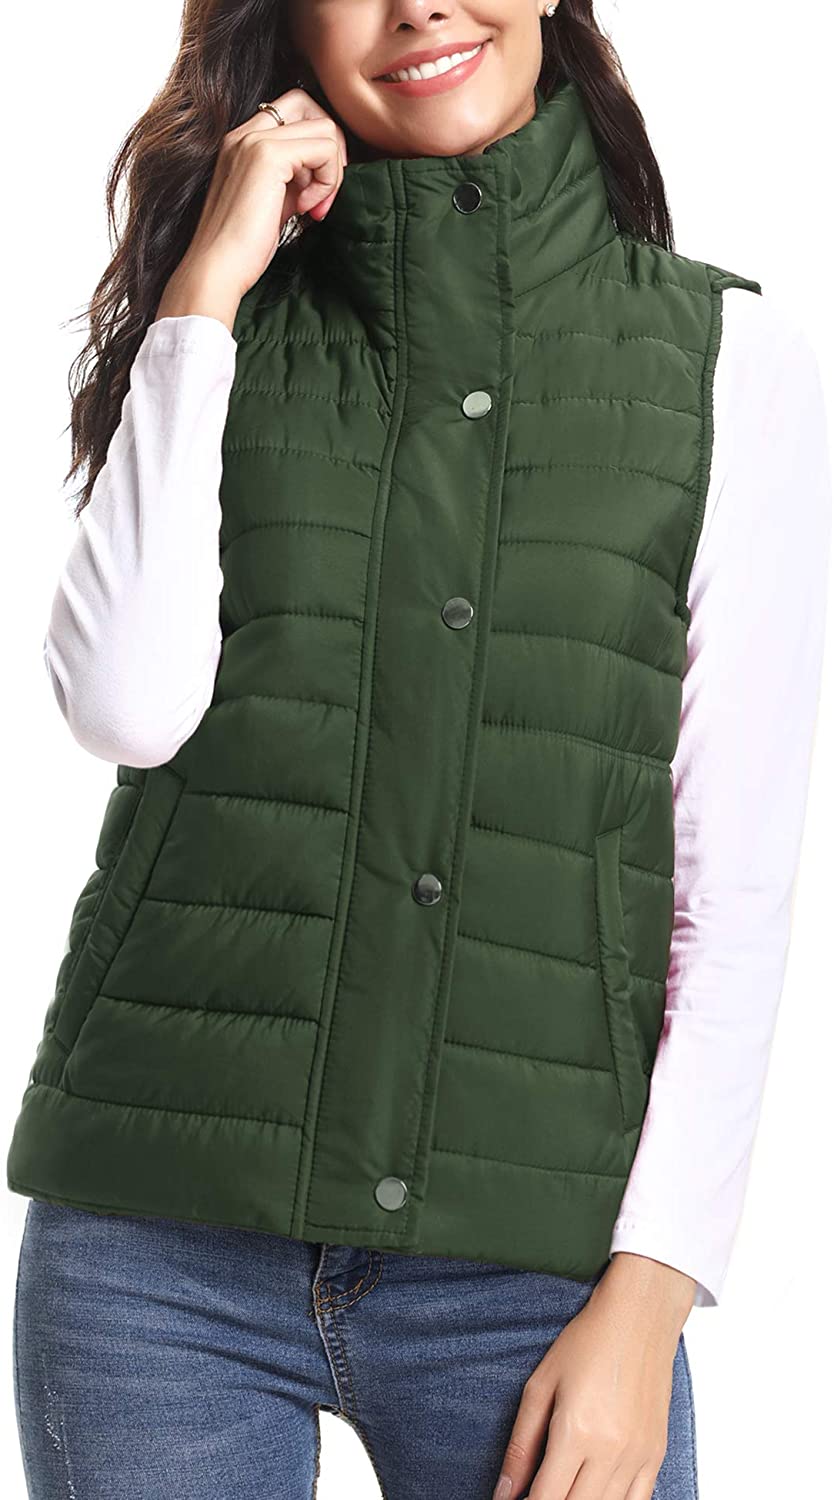 iClosam Womens Winter Puffer Vest Lightweight Packable Down Vest Quilted Jacket Coat